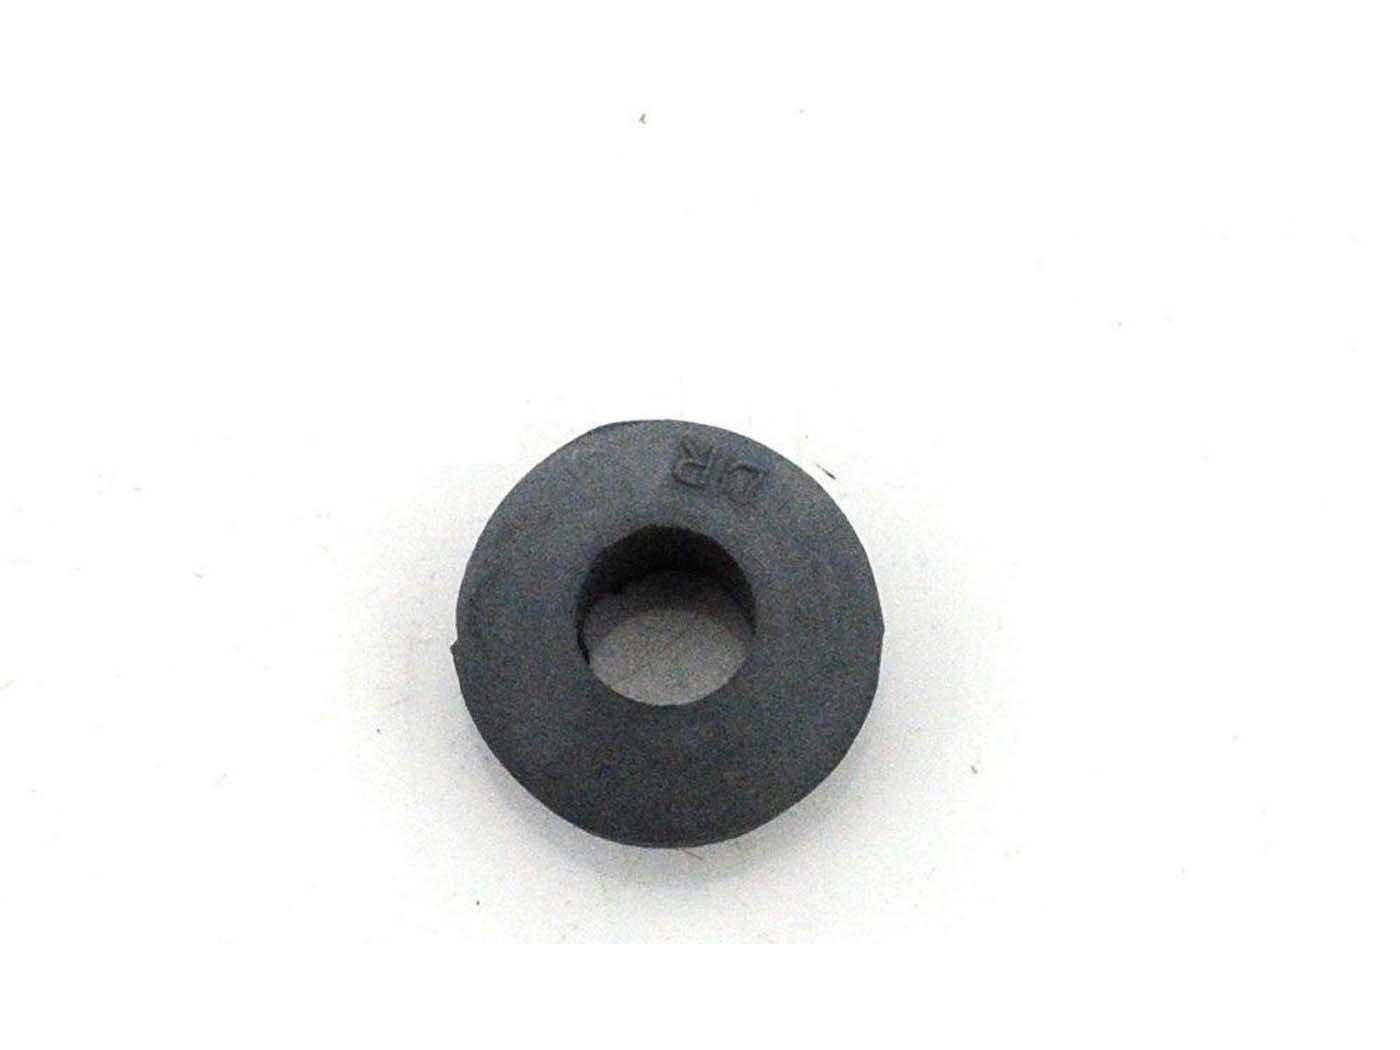 Rubber Grommet Drilastic Cable Grommet For Zündapp R 50 Type 561-003, R 50 Type 561-05, RS 50 Type 561-004, RS 50 Super Type 561-06 L0